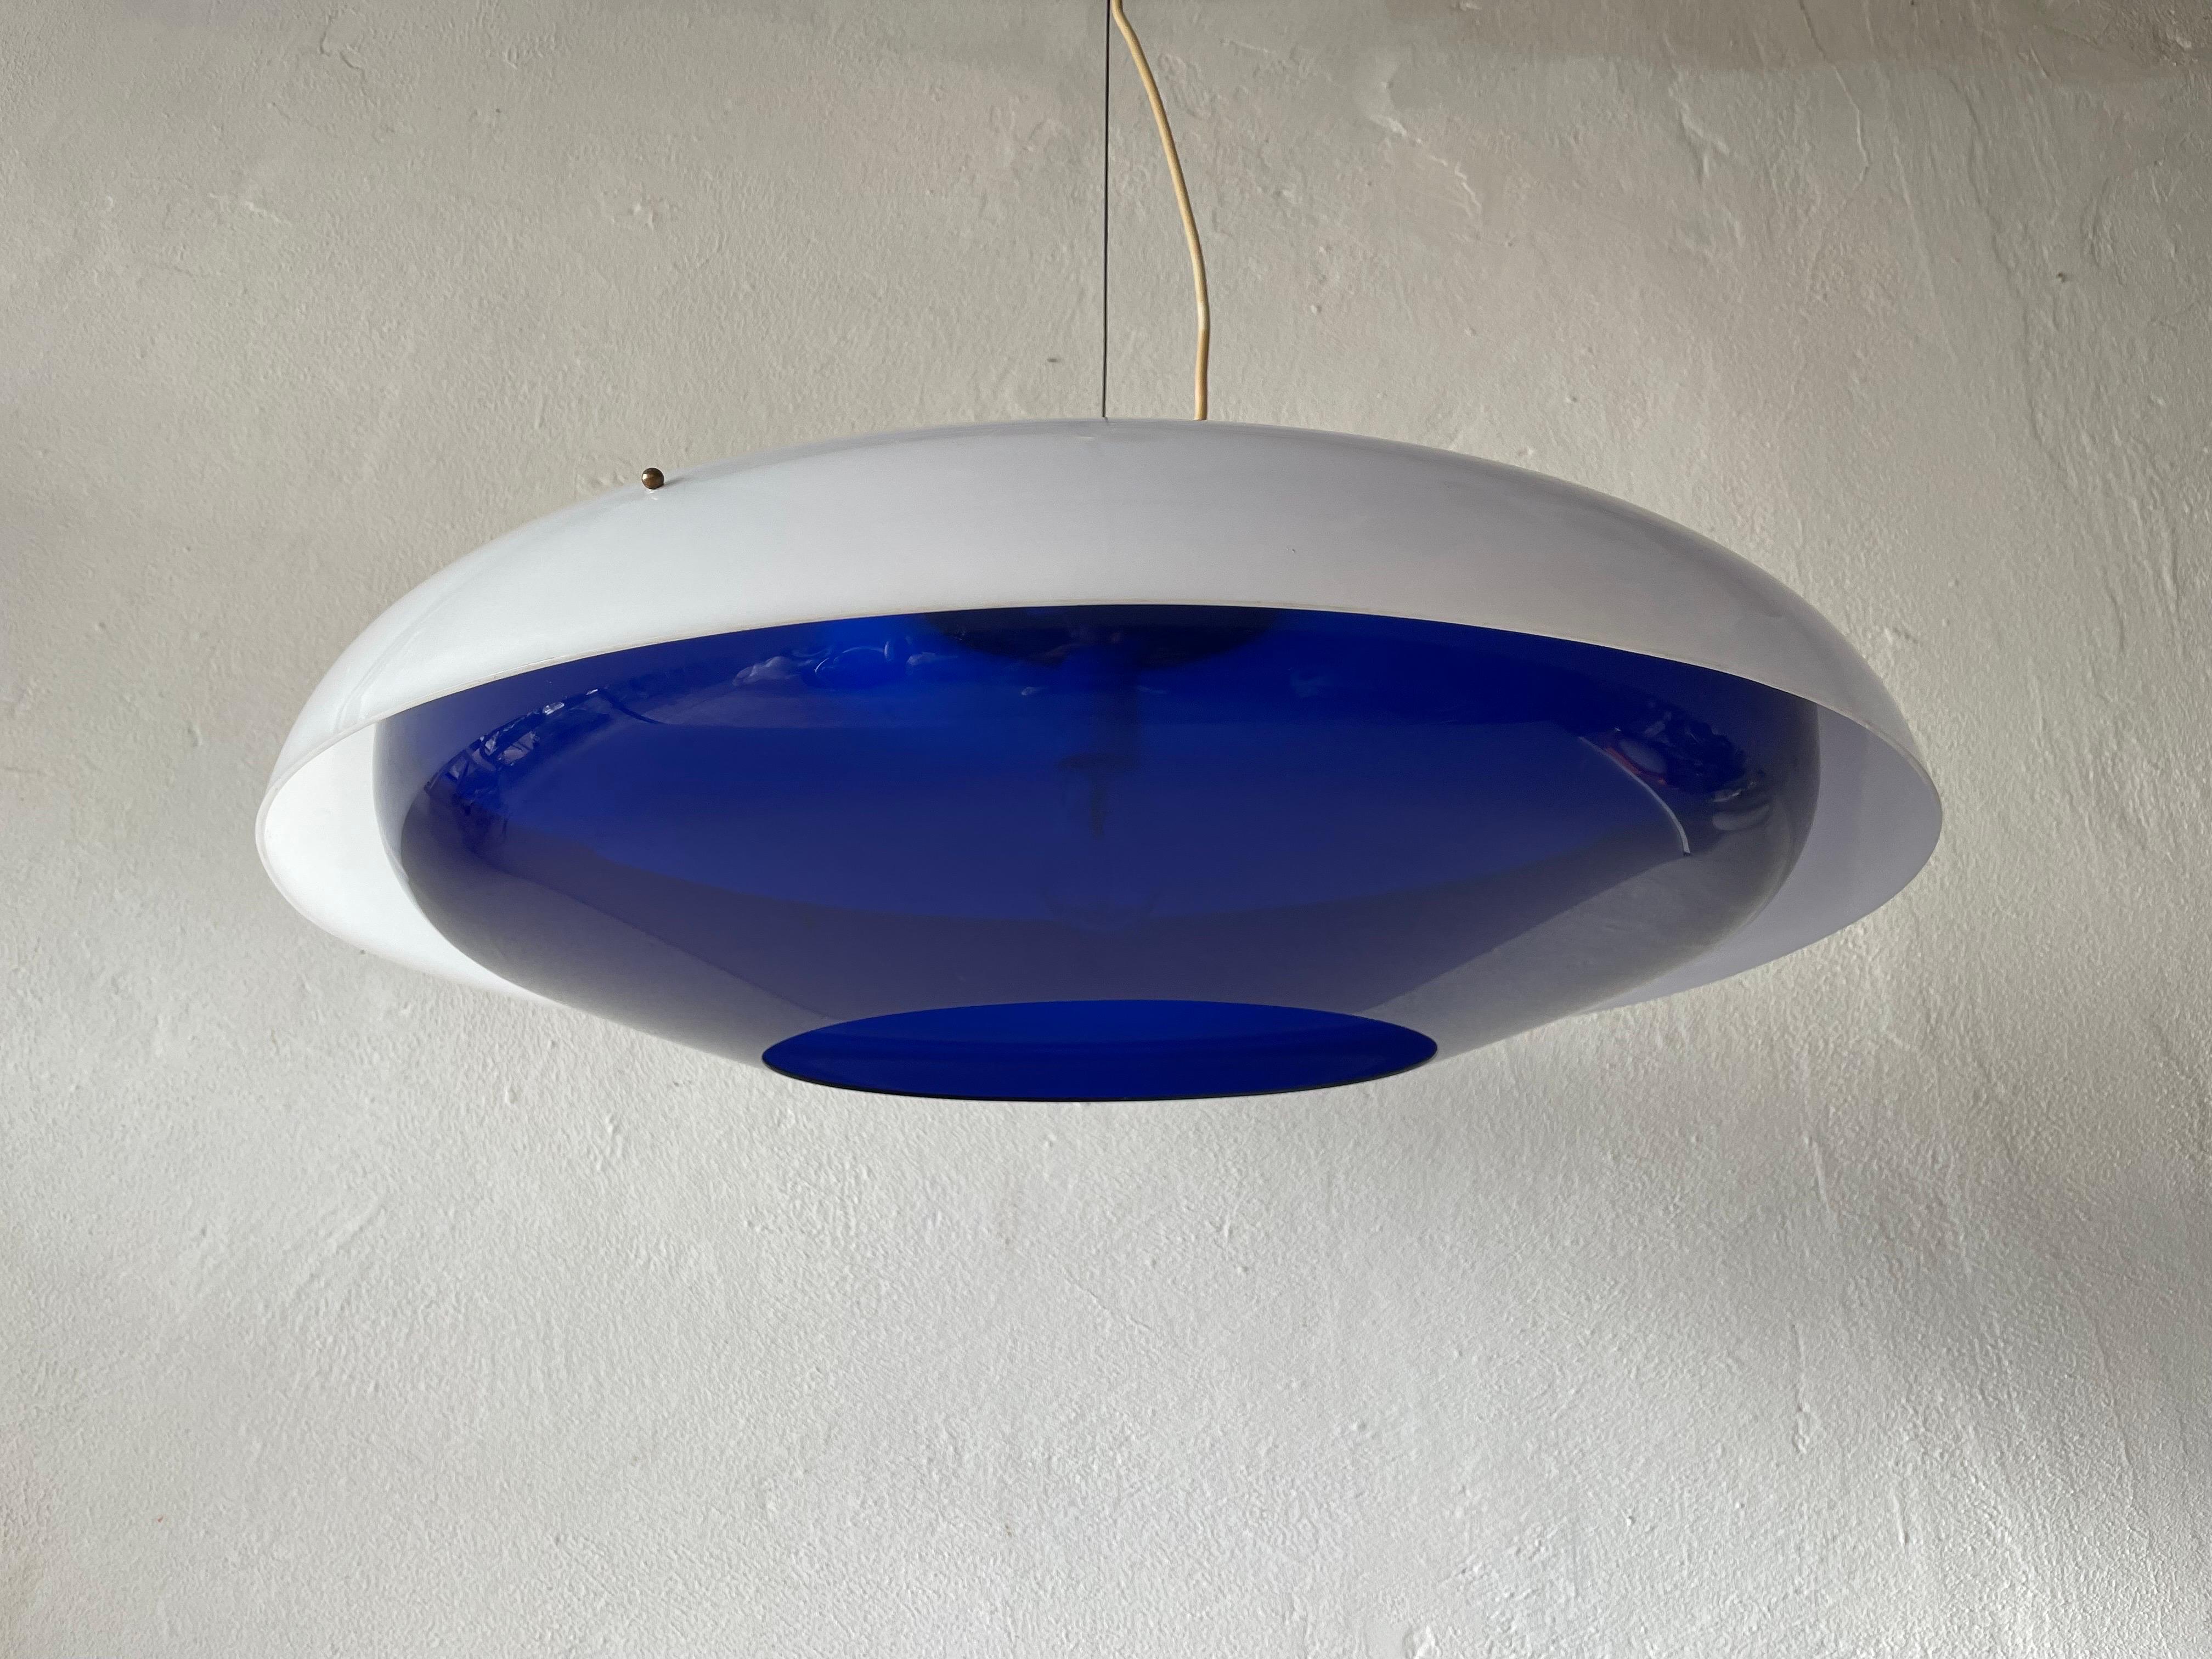 Ufo Design Blue & White Plexiglass XXL Pendant Lamp, 1970s, Italy

Lampshade is in very good vintage condition.

This lamp works with E27 light bulb. 
Wired and suitable to use with 220V and 110V for all countries.

Measurements:
Diameter: 65